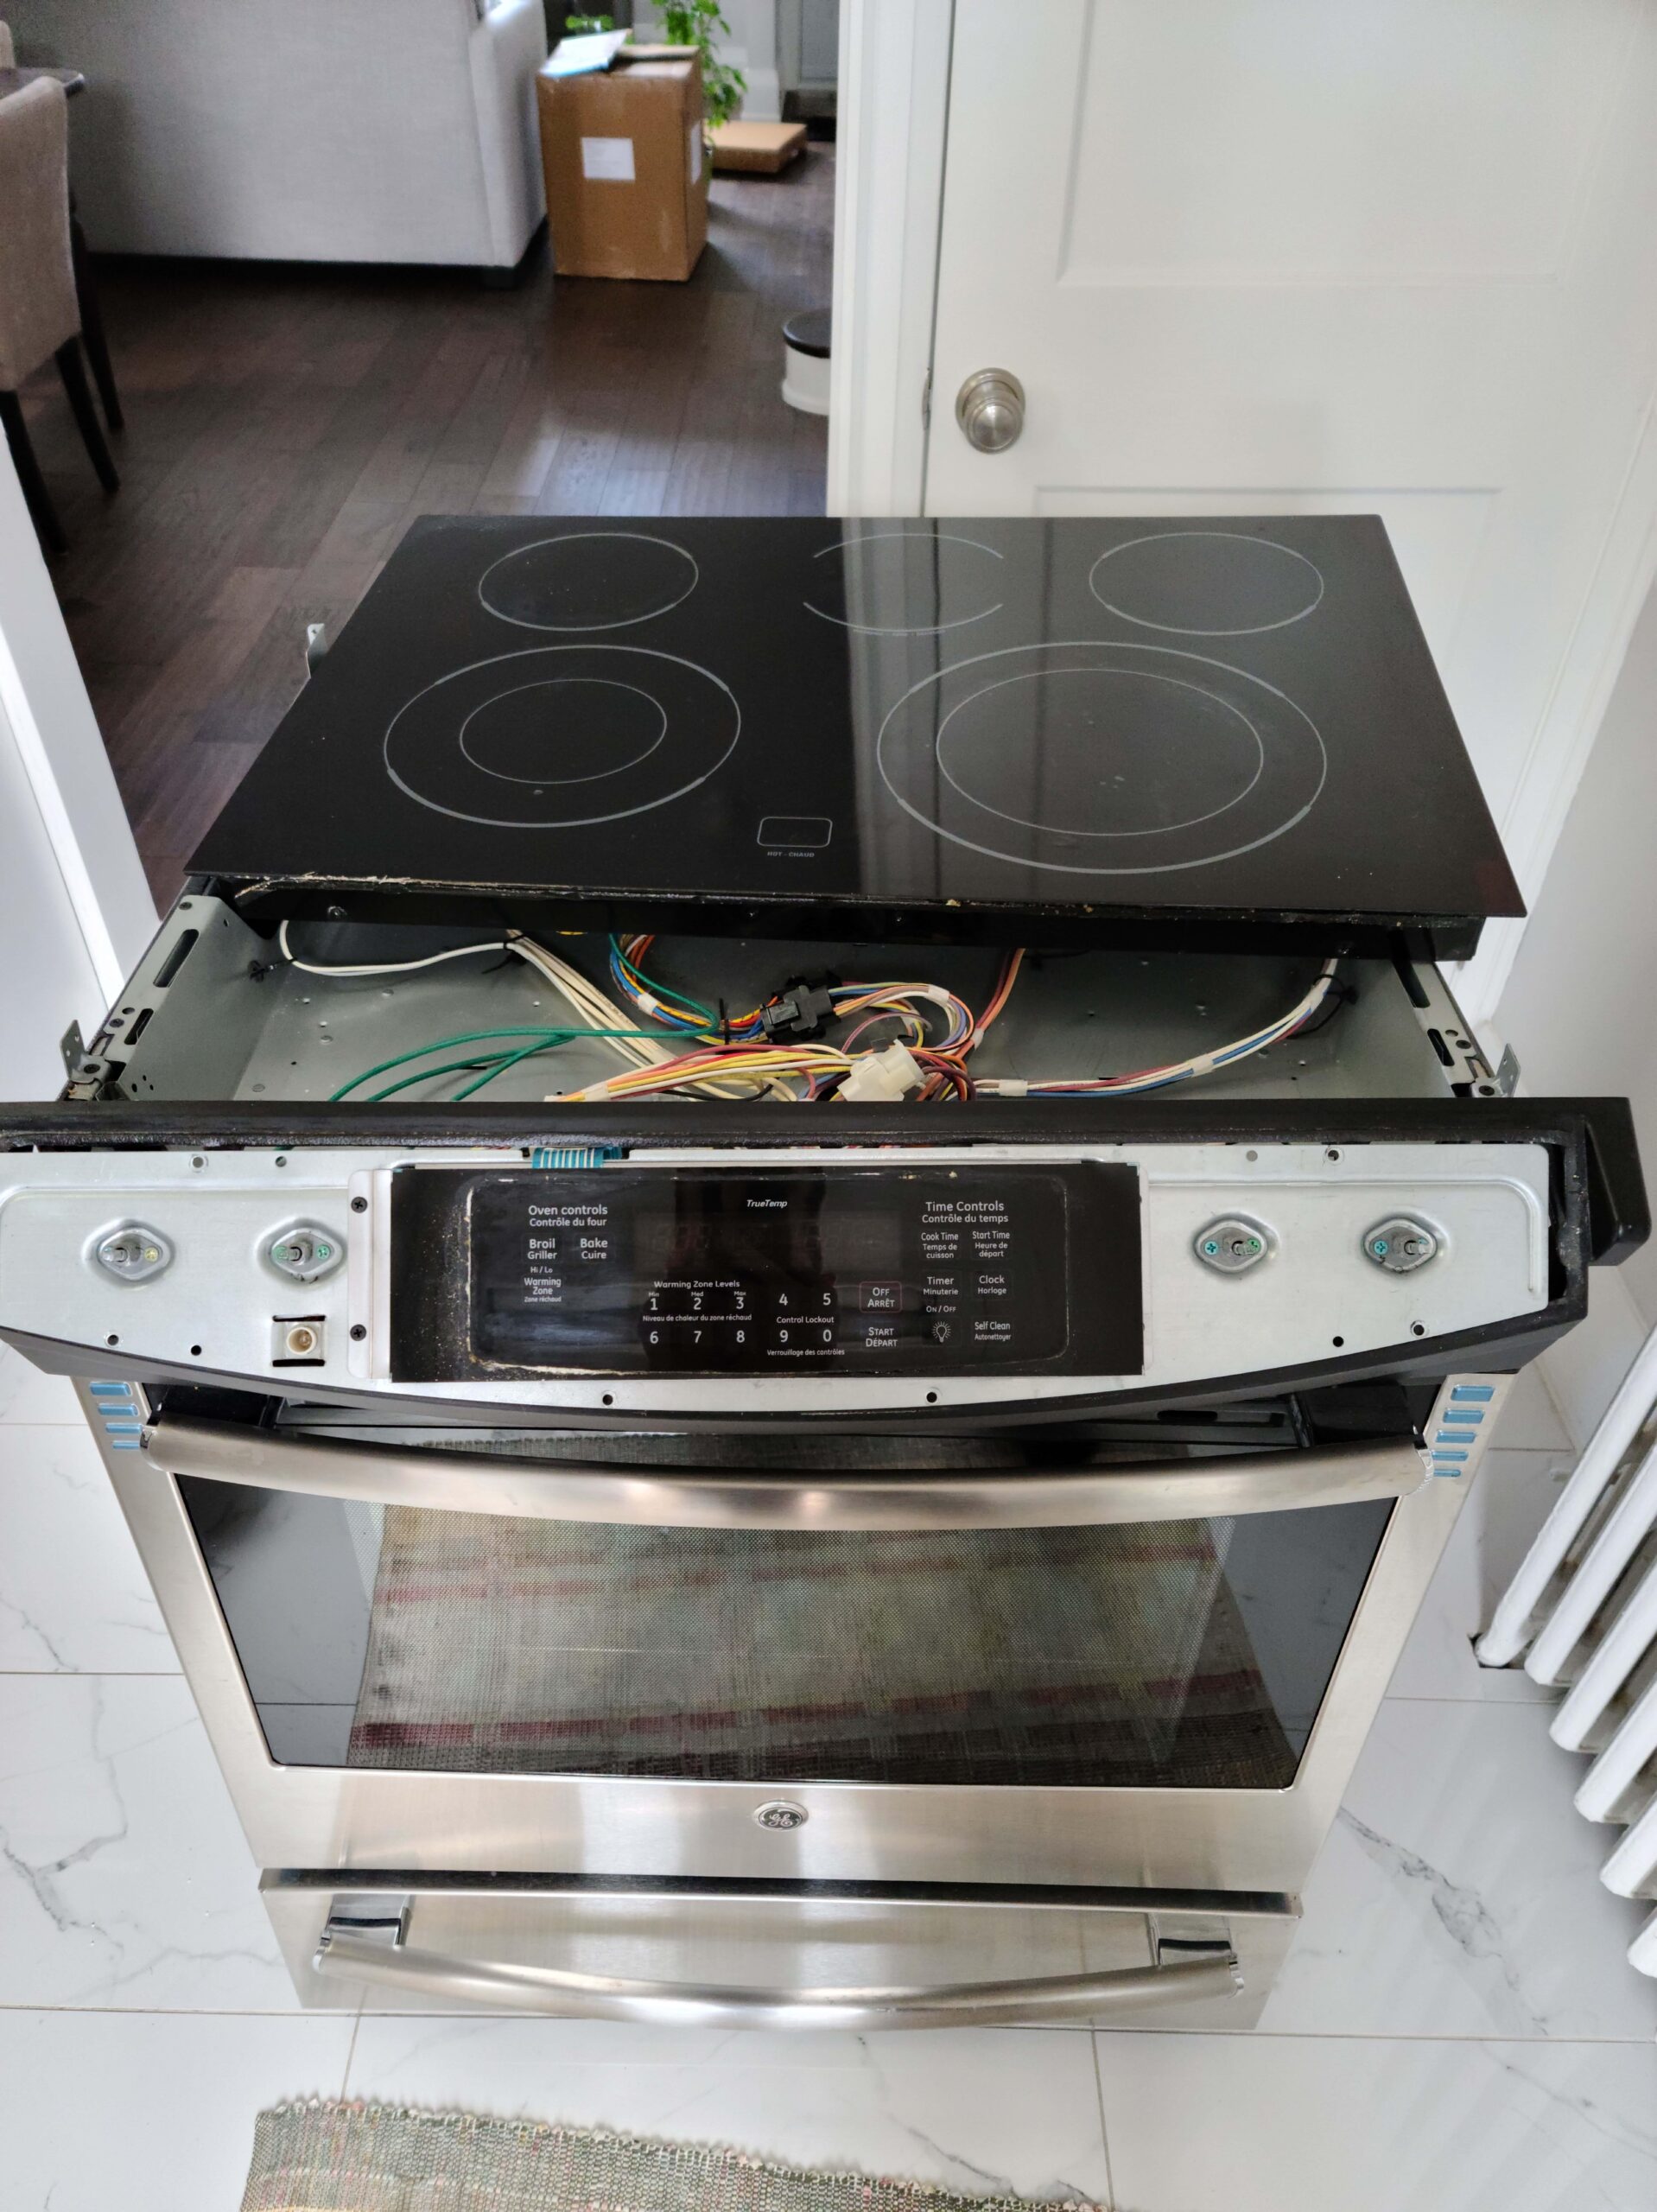 CHOOSE THE BEST STOVE WITH THESE TIPS